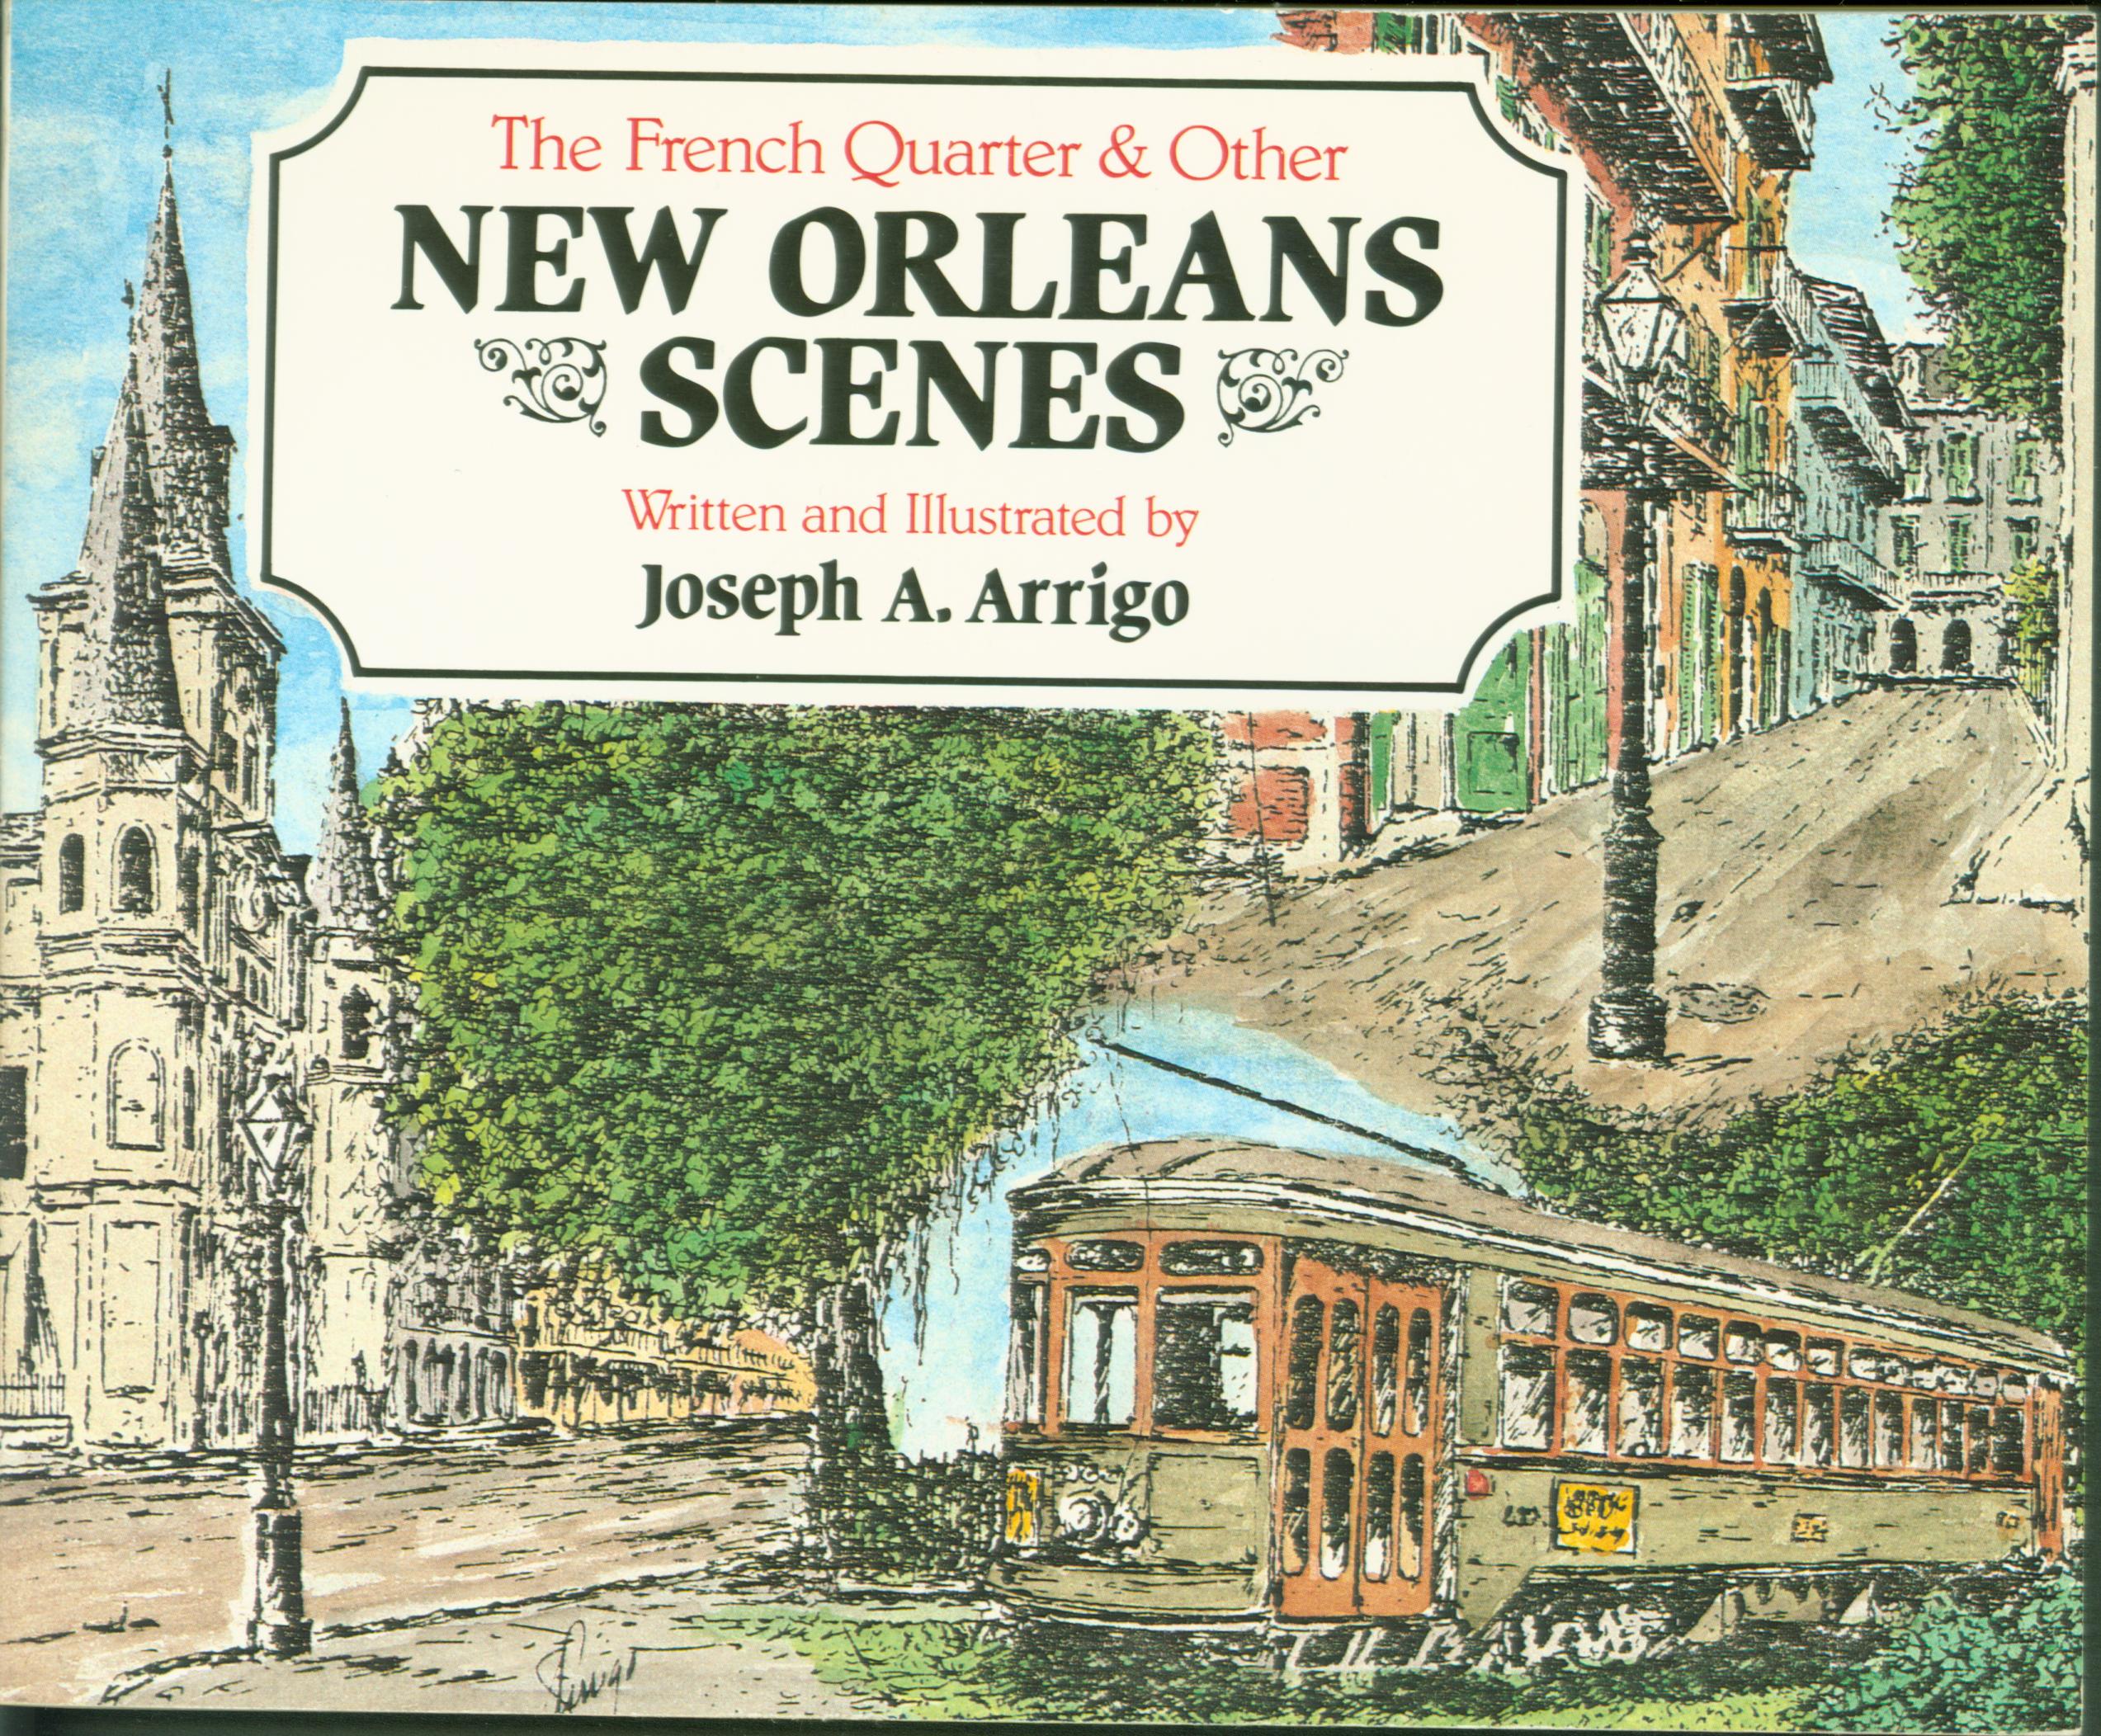 THE FRENCH QUARTER AND OTHER NEW ORLEANS SCENES.